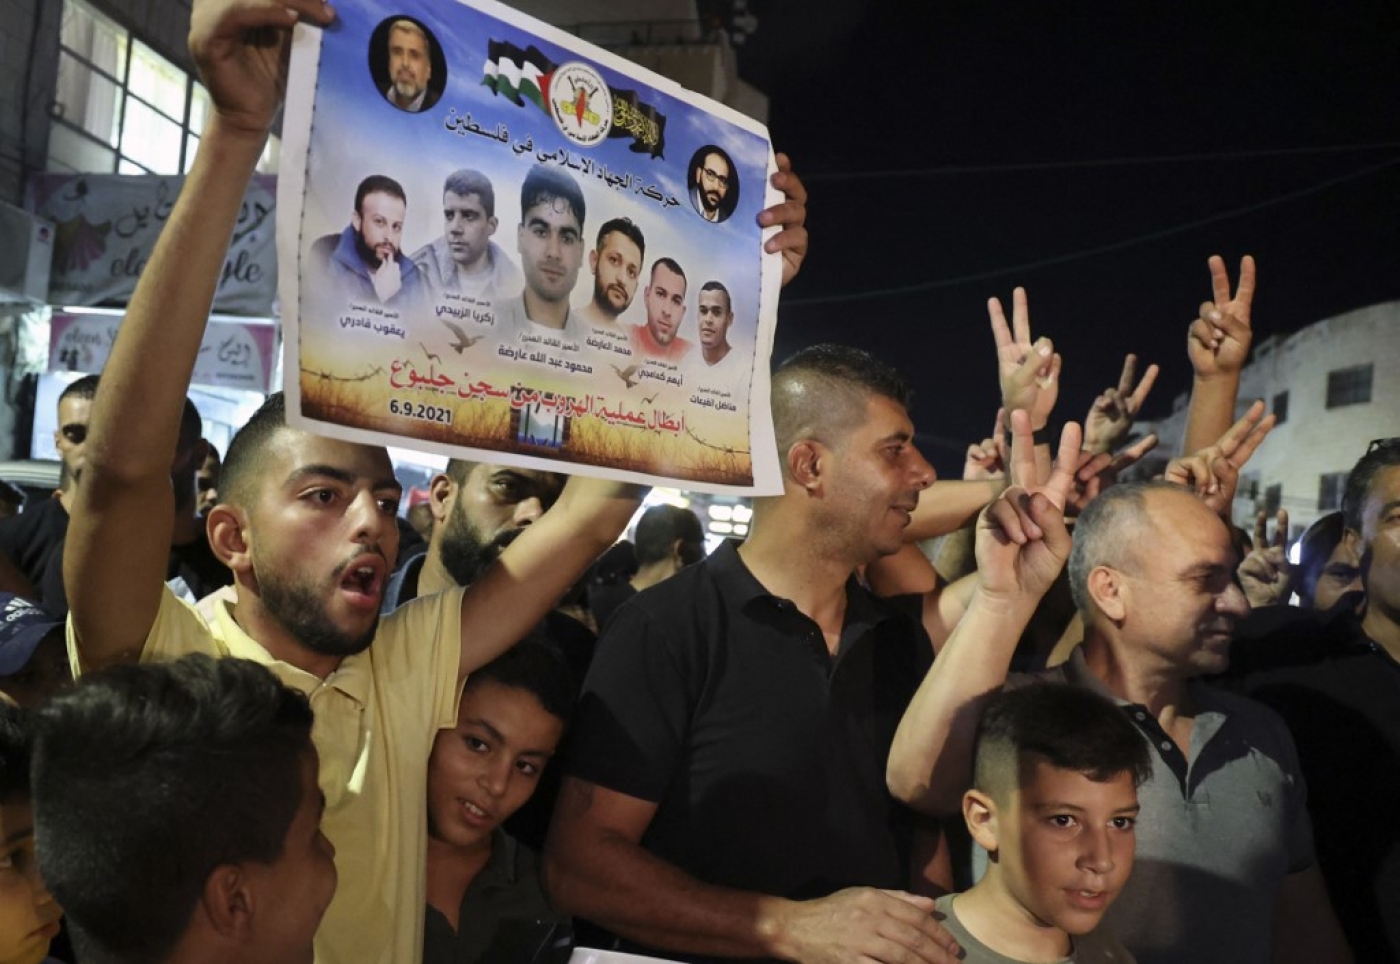 A Palestinian man shows a poster of the six Palestinians who escaped from an Israeli prison 